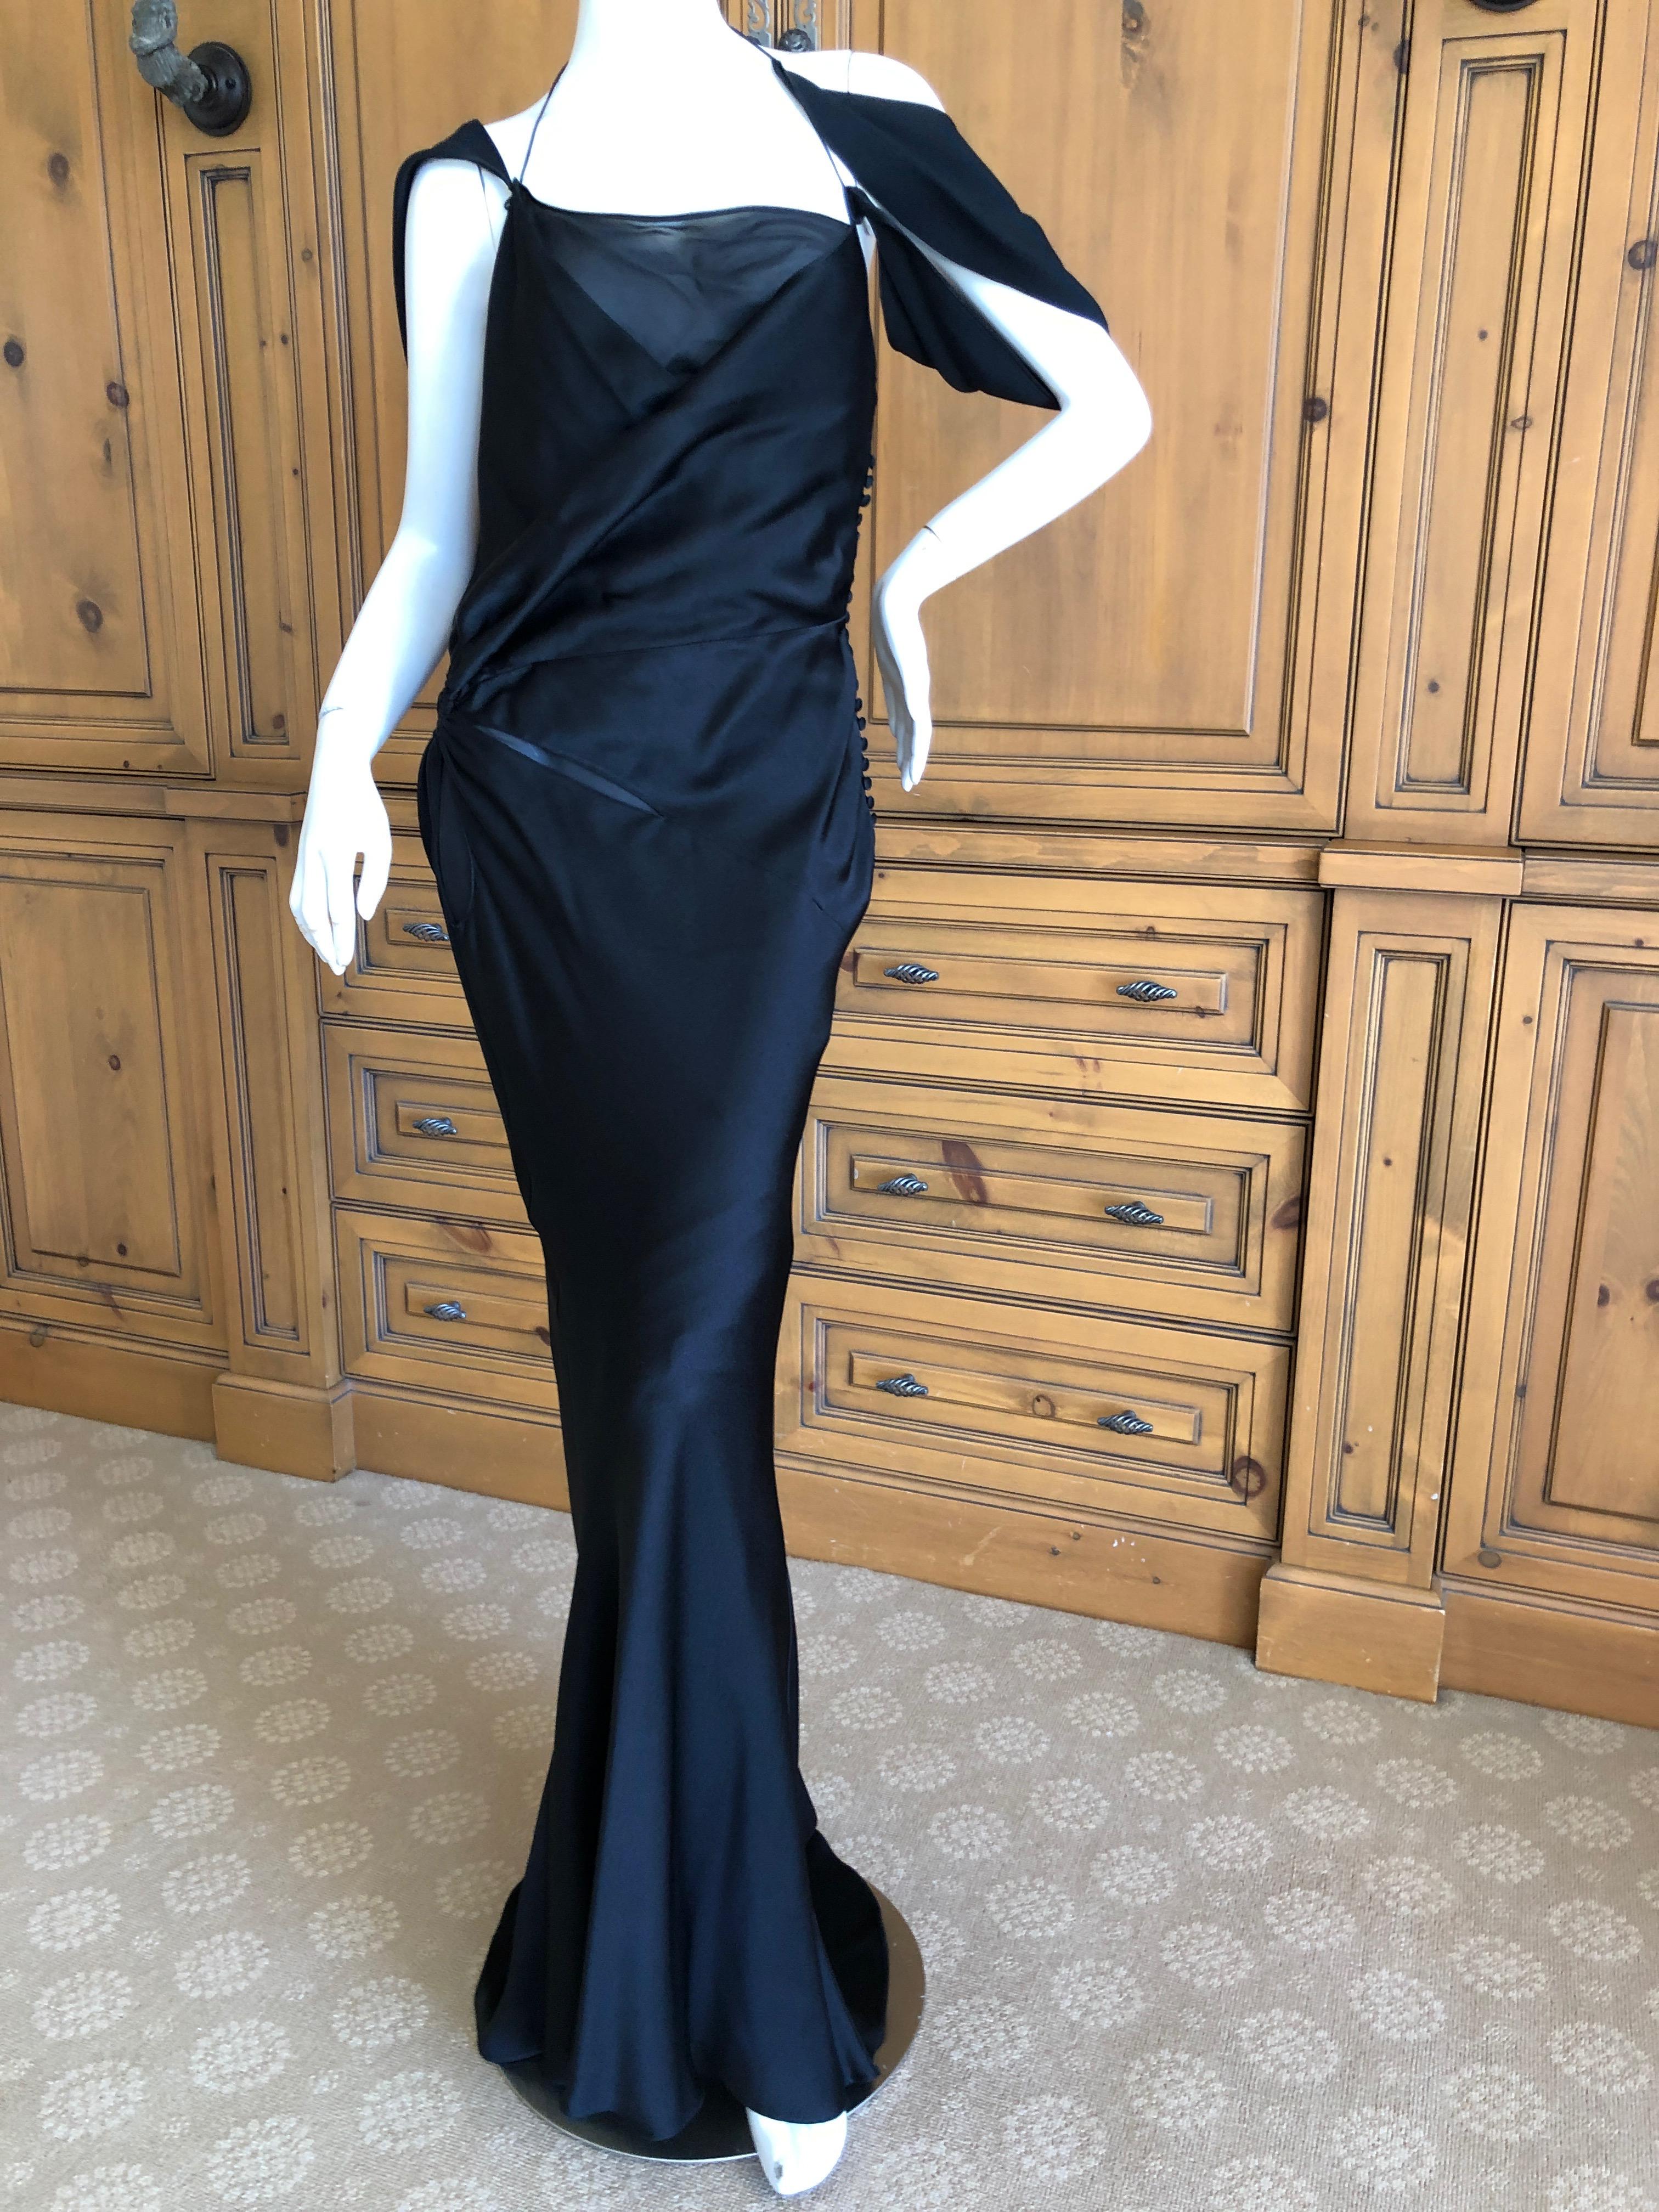 John Galliano Spring 2000 Black Bias Cut Evening Dress with Sheer Inserts Sz 42 In Excellent Condition For Sale In Cloverdale, CA